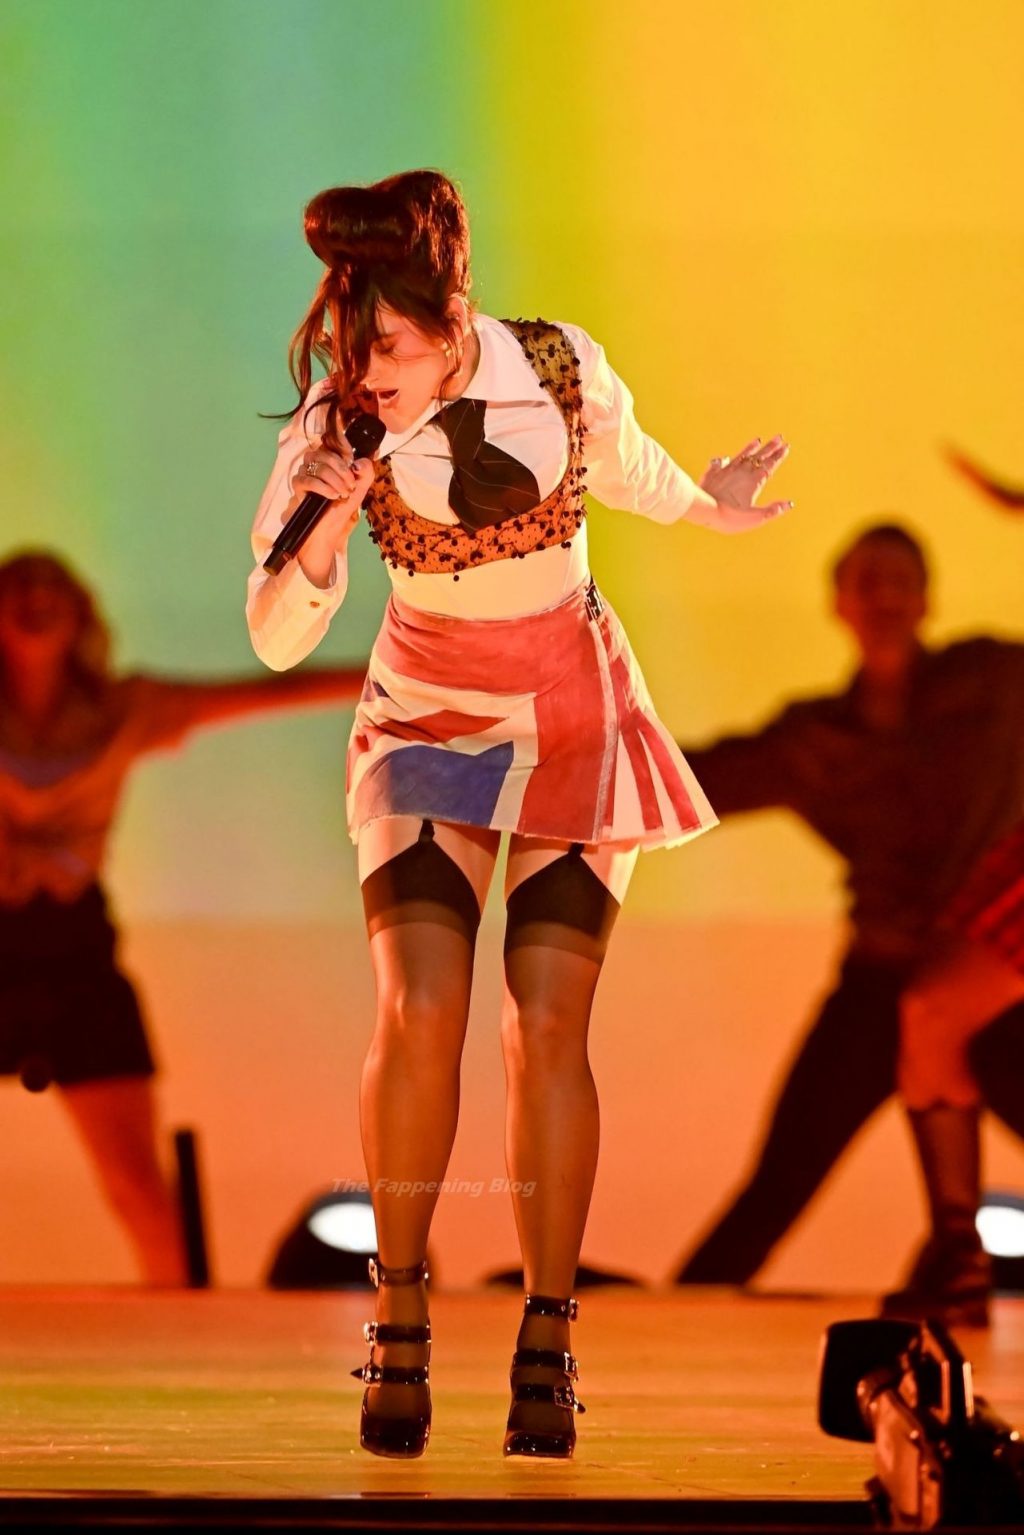 Dua Lipa Performs on Stage at The BRIT Awards in London (96 Photos + Video)